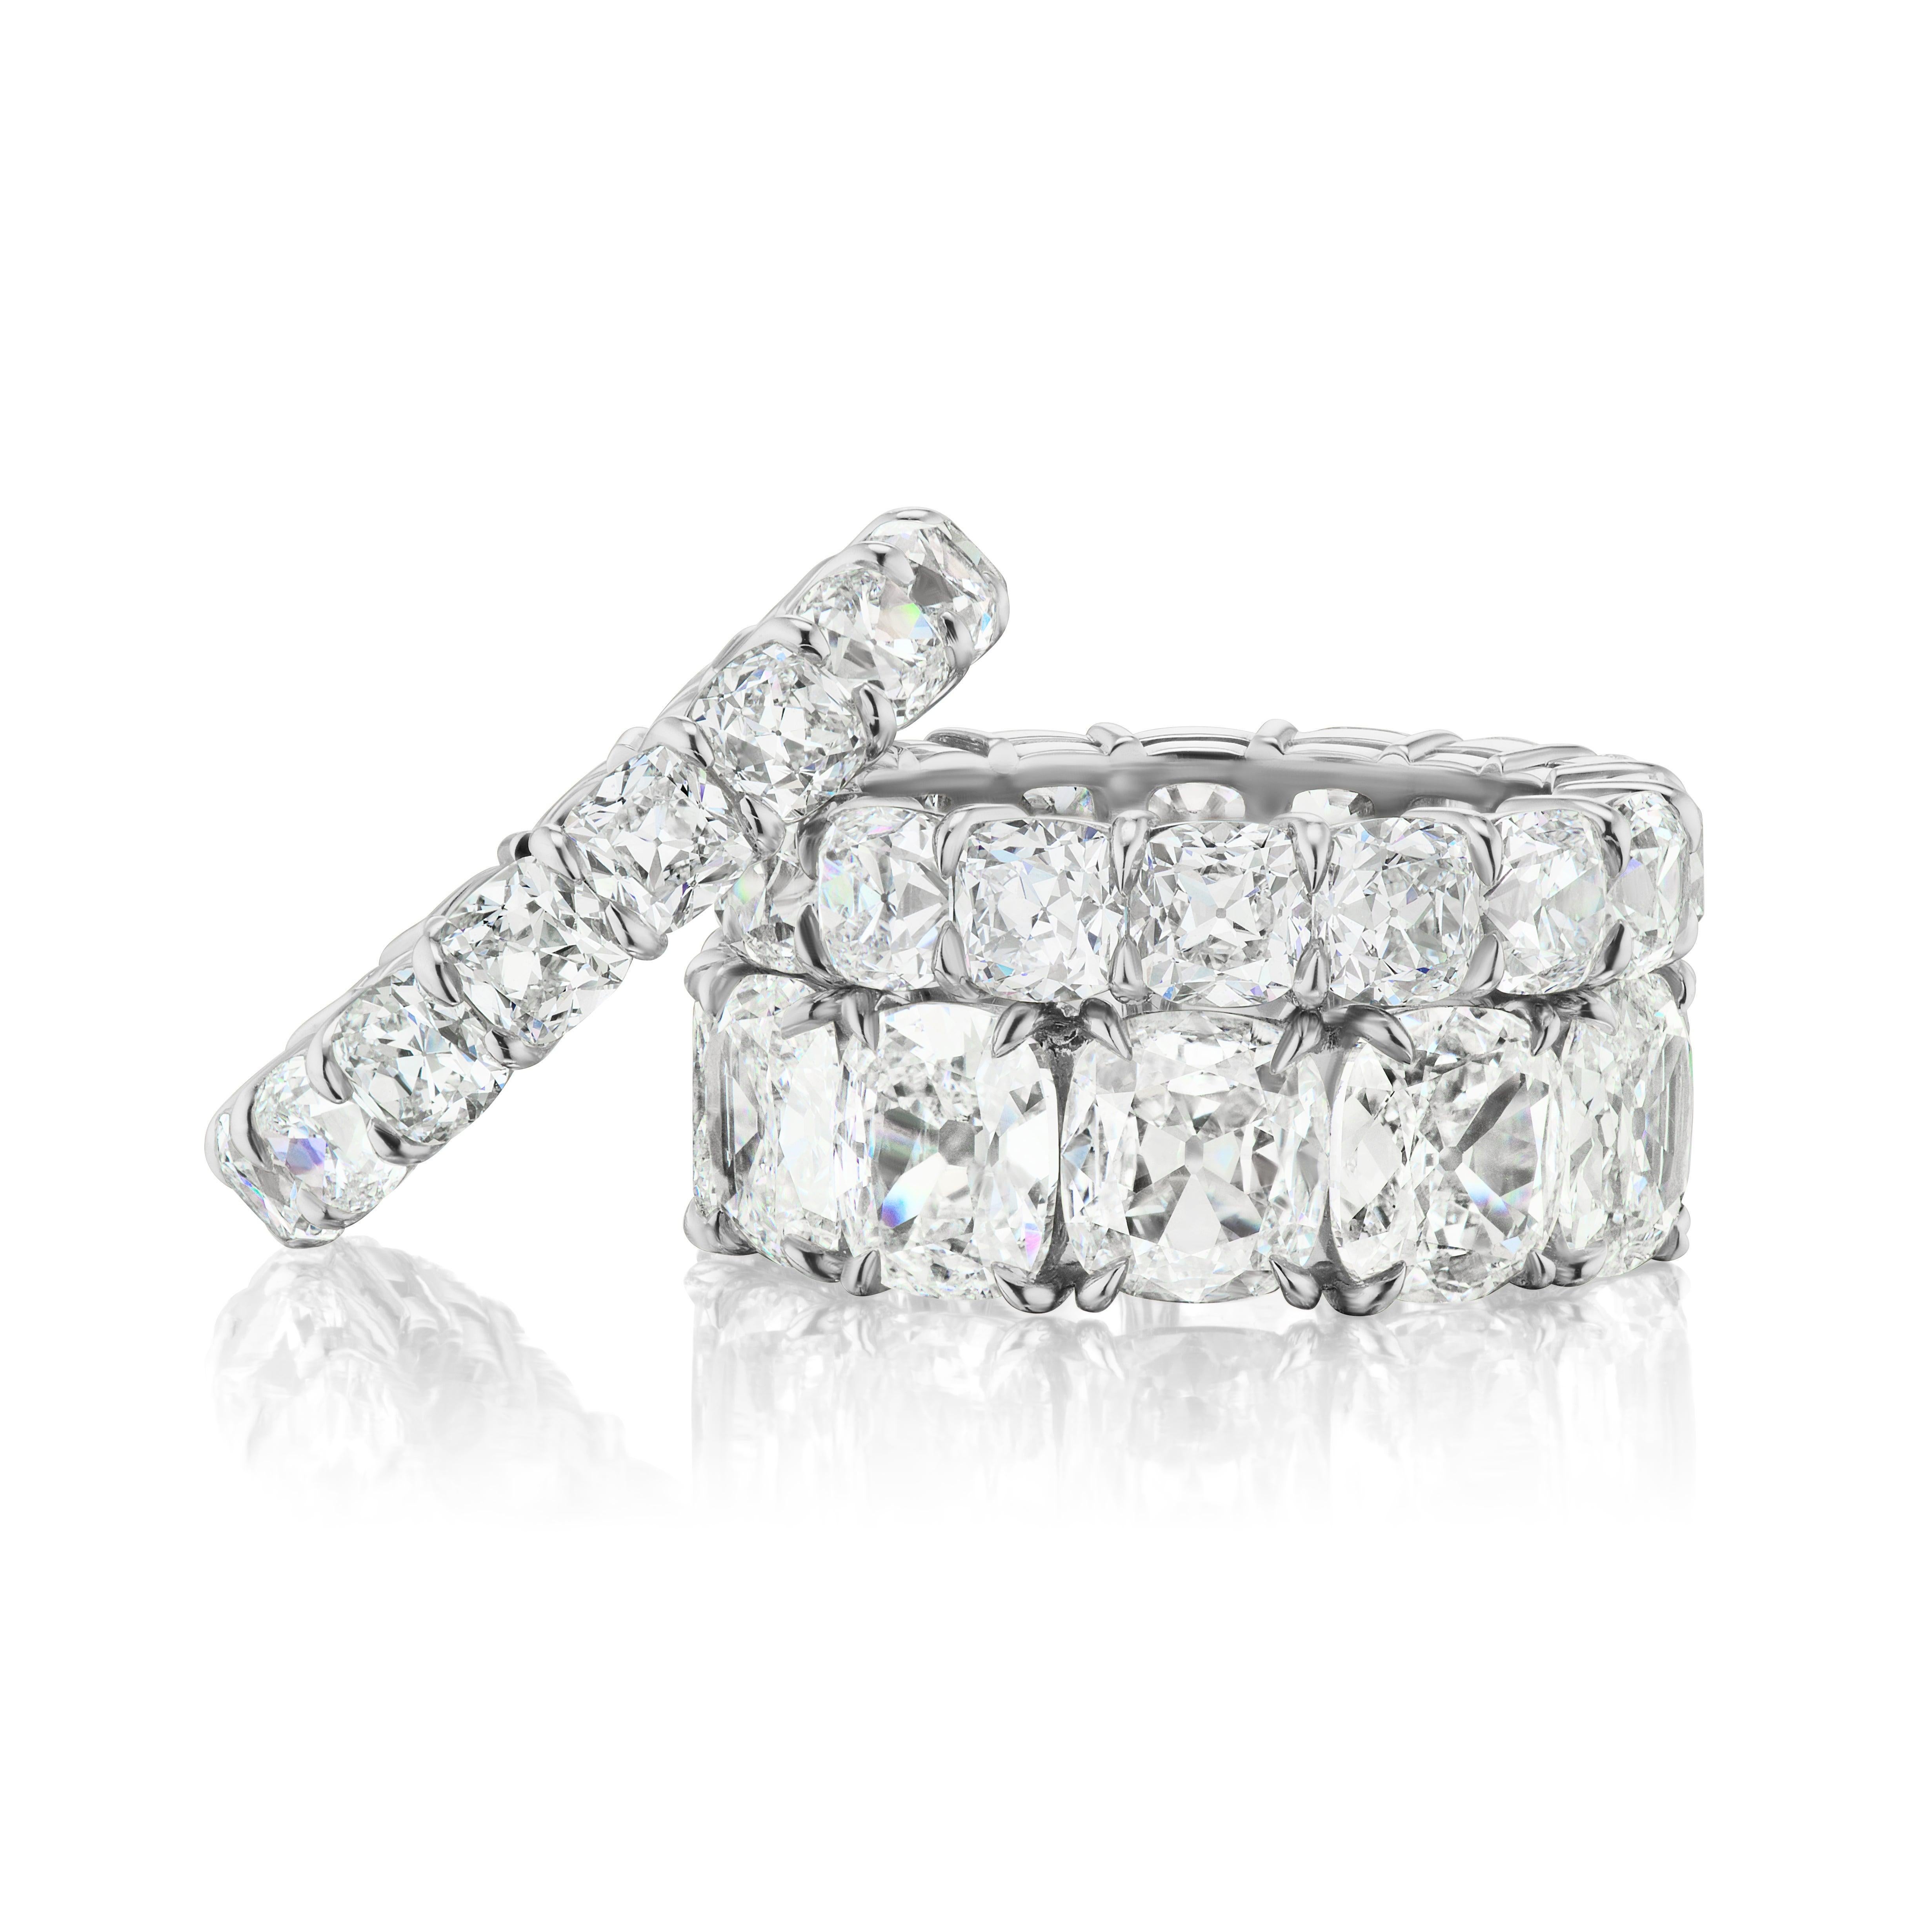 This spectacular cushion cut diamond eternity band is comprised of traditional cushion cut diamonds approximately one carat each H-I color and VS-SI clarity.  Please inquire forVideo and GIA grading certficates.

Classic Platinum Diamond Eternity